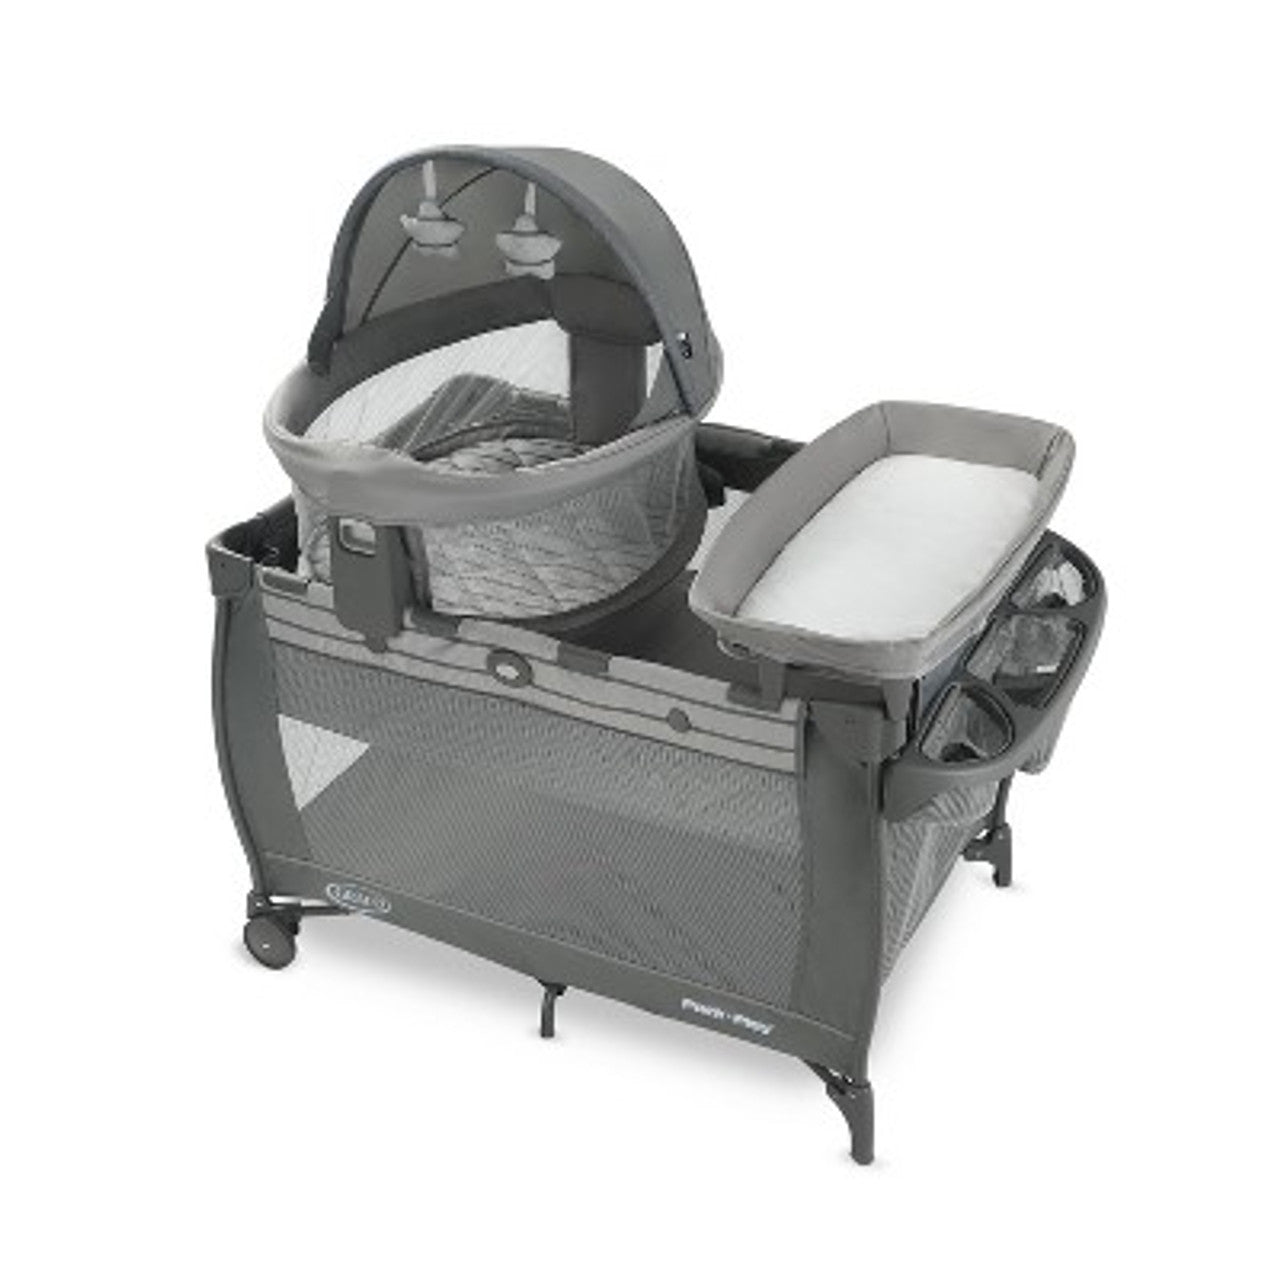 New - Graco Pack 'n Play Travel Dome LX Playard - Maison